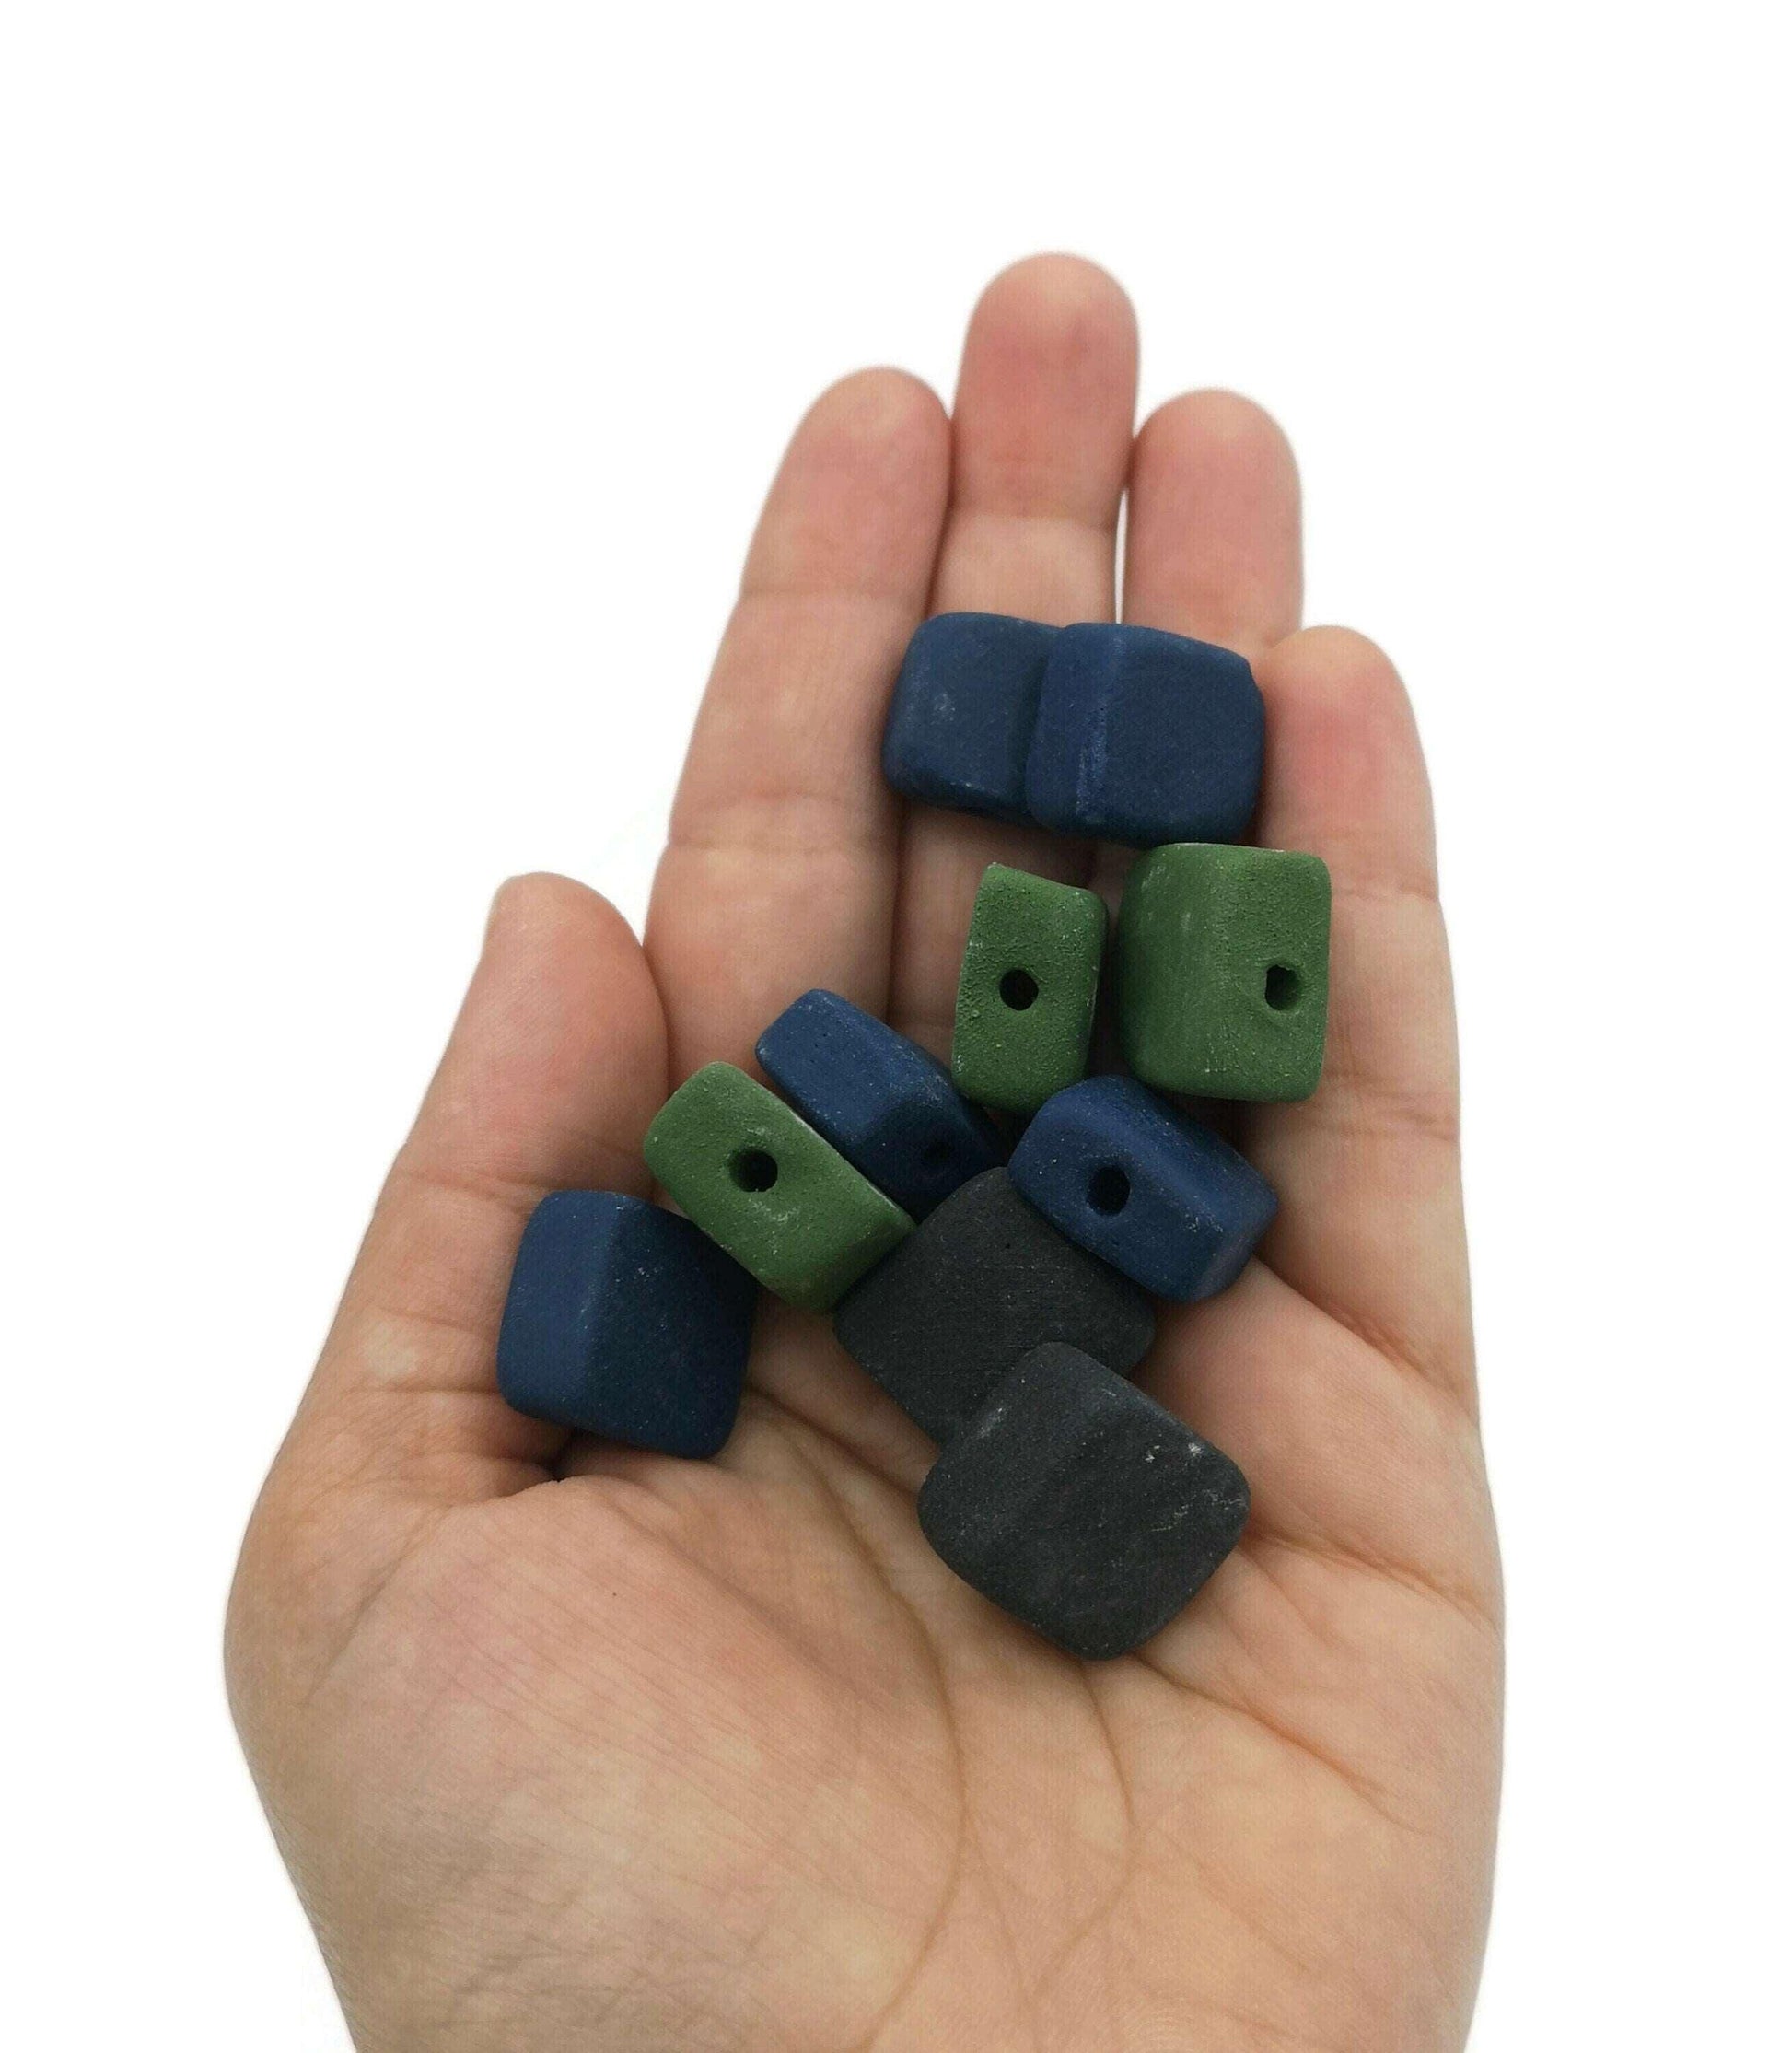 10Pc 15mm Ceramic Beads For jewelry Making 2mm Hole, Matte Square Clay Beads, Unique Assorted Beads Set Square Shape, Large Handmade Beads